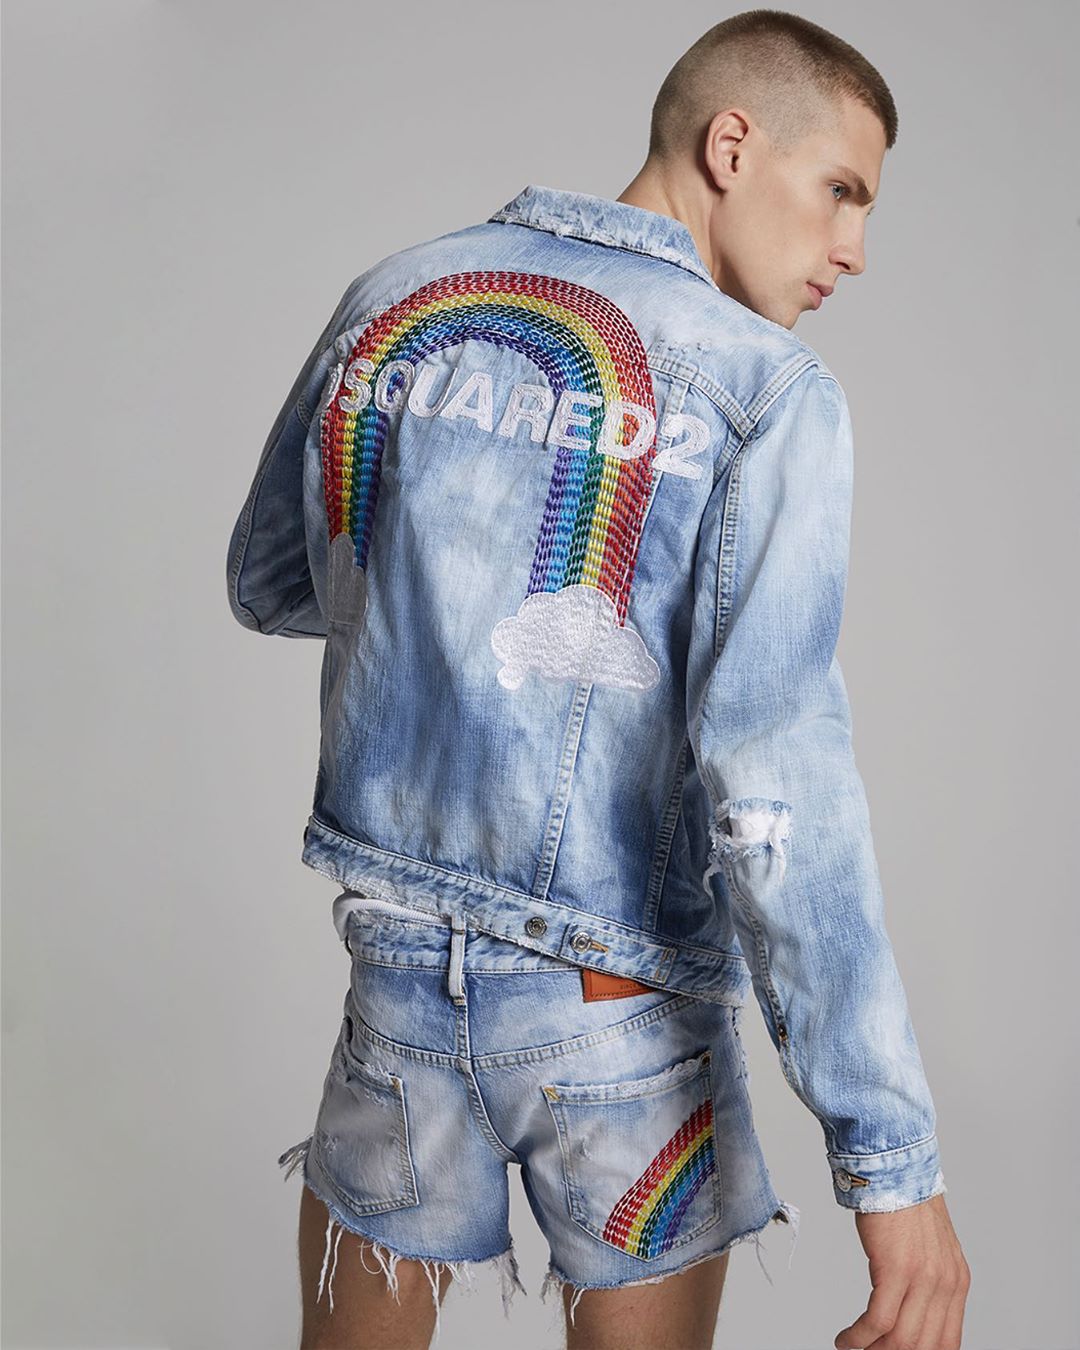 DSQUARED2  - Dean & Dan Caten - #D2Pride now and always! The Rainbow will help YOU shine 🌈 #Pride2020